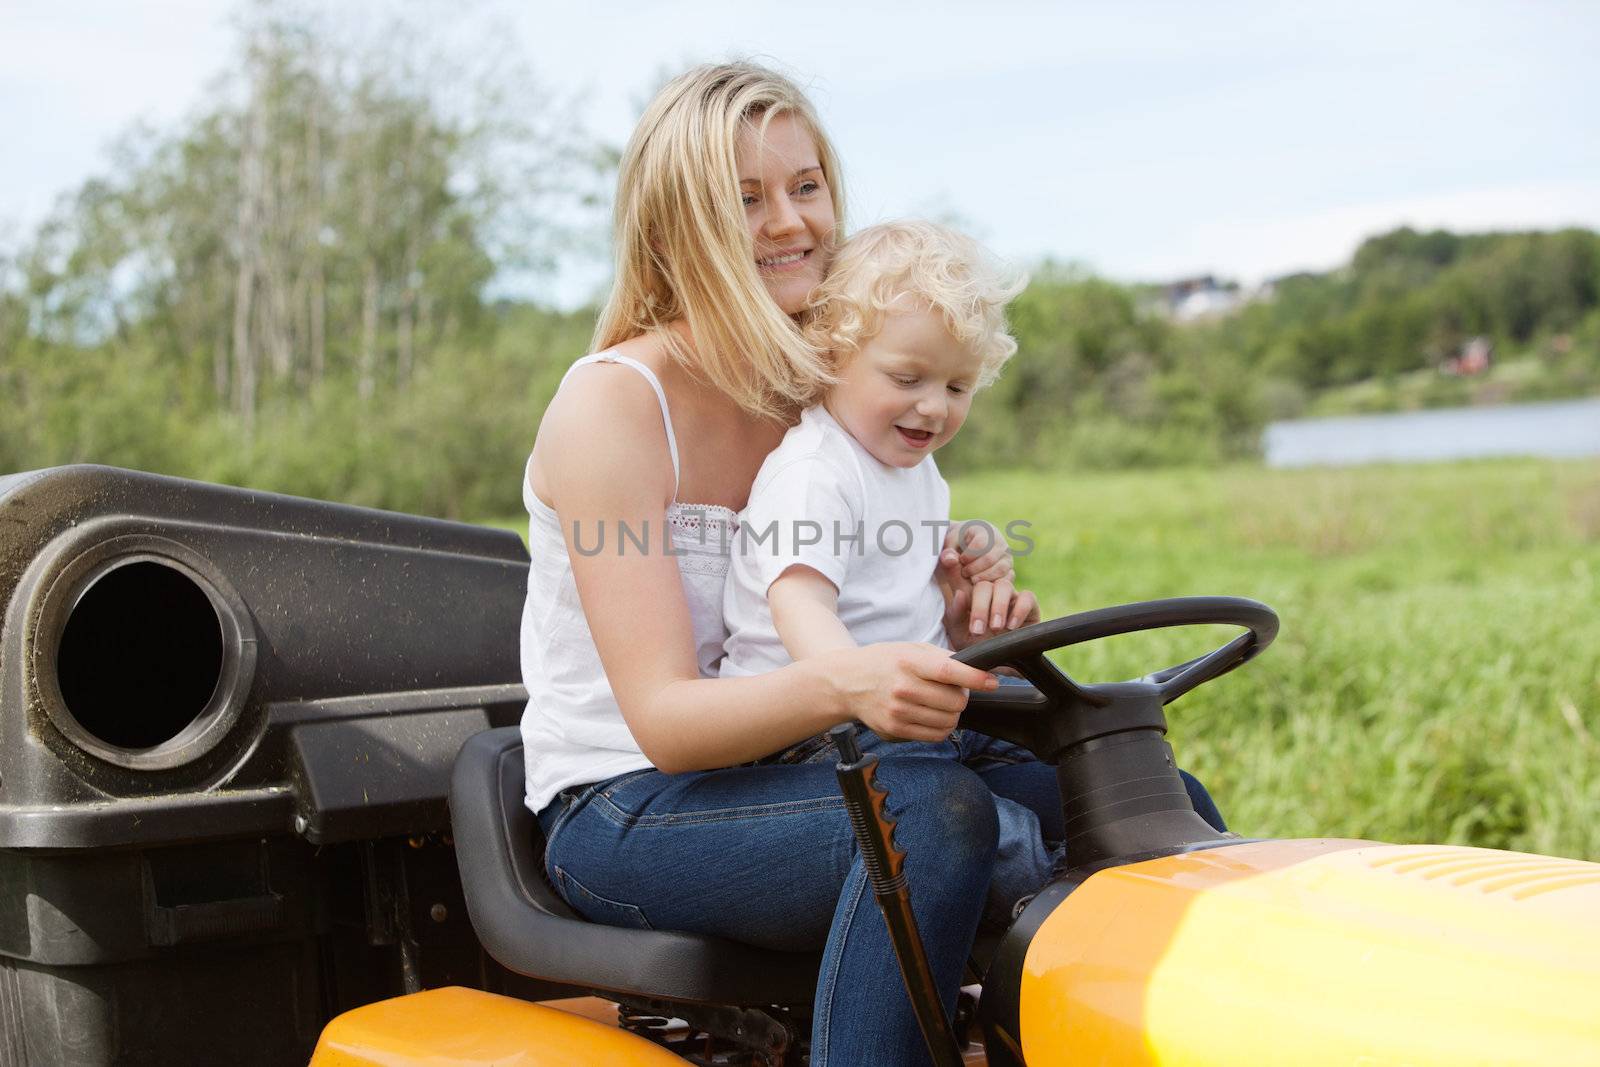 Smiling young woman with adorable child sitting on lawn mower